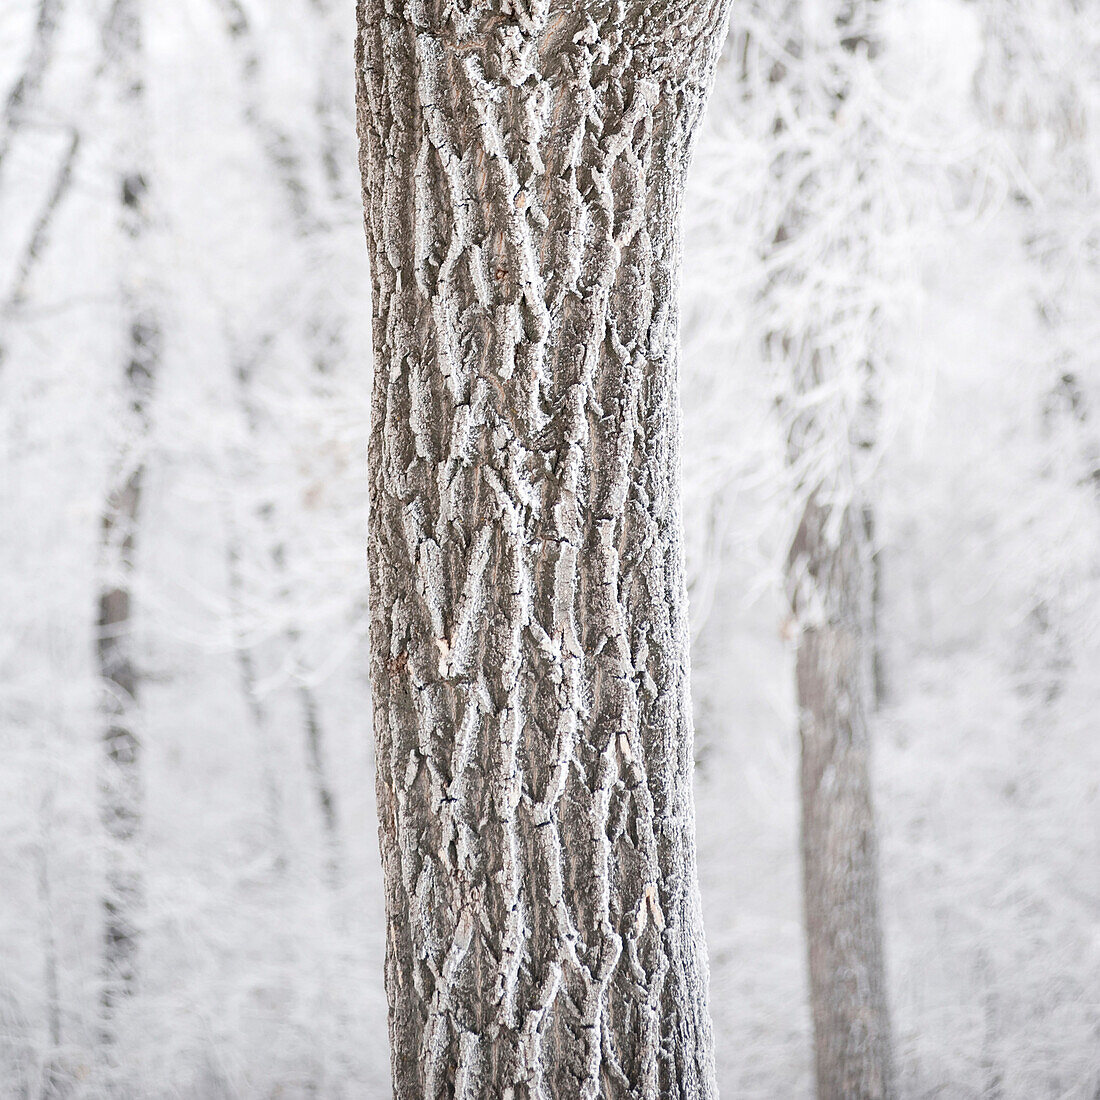 'Winnipeg, Manitoba, Canada; A Tree Trunk And It's Branches Covered With Snow'